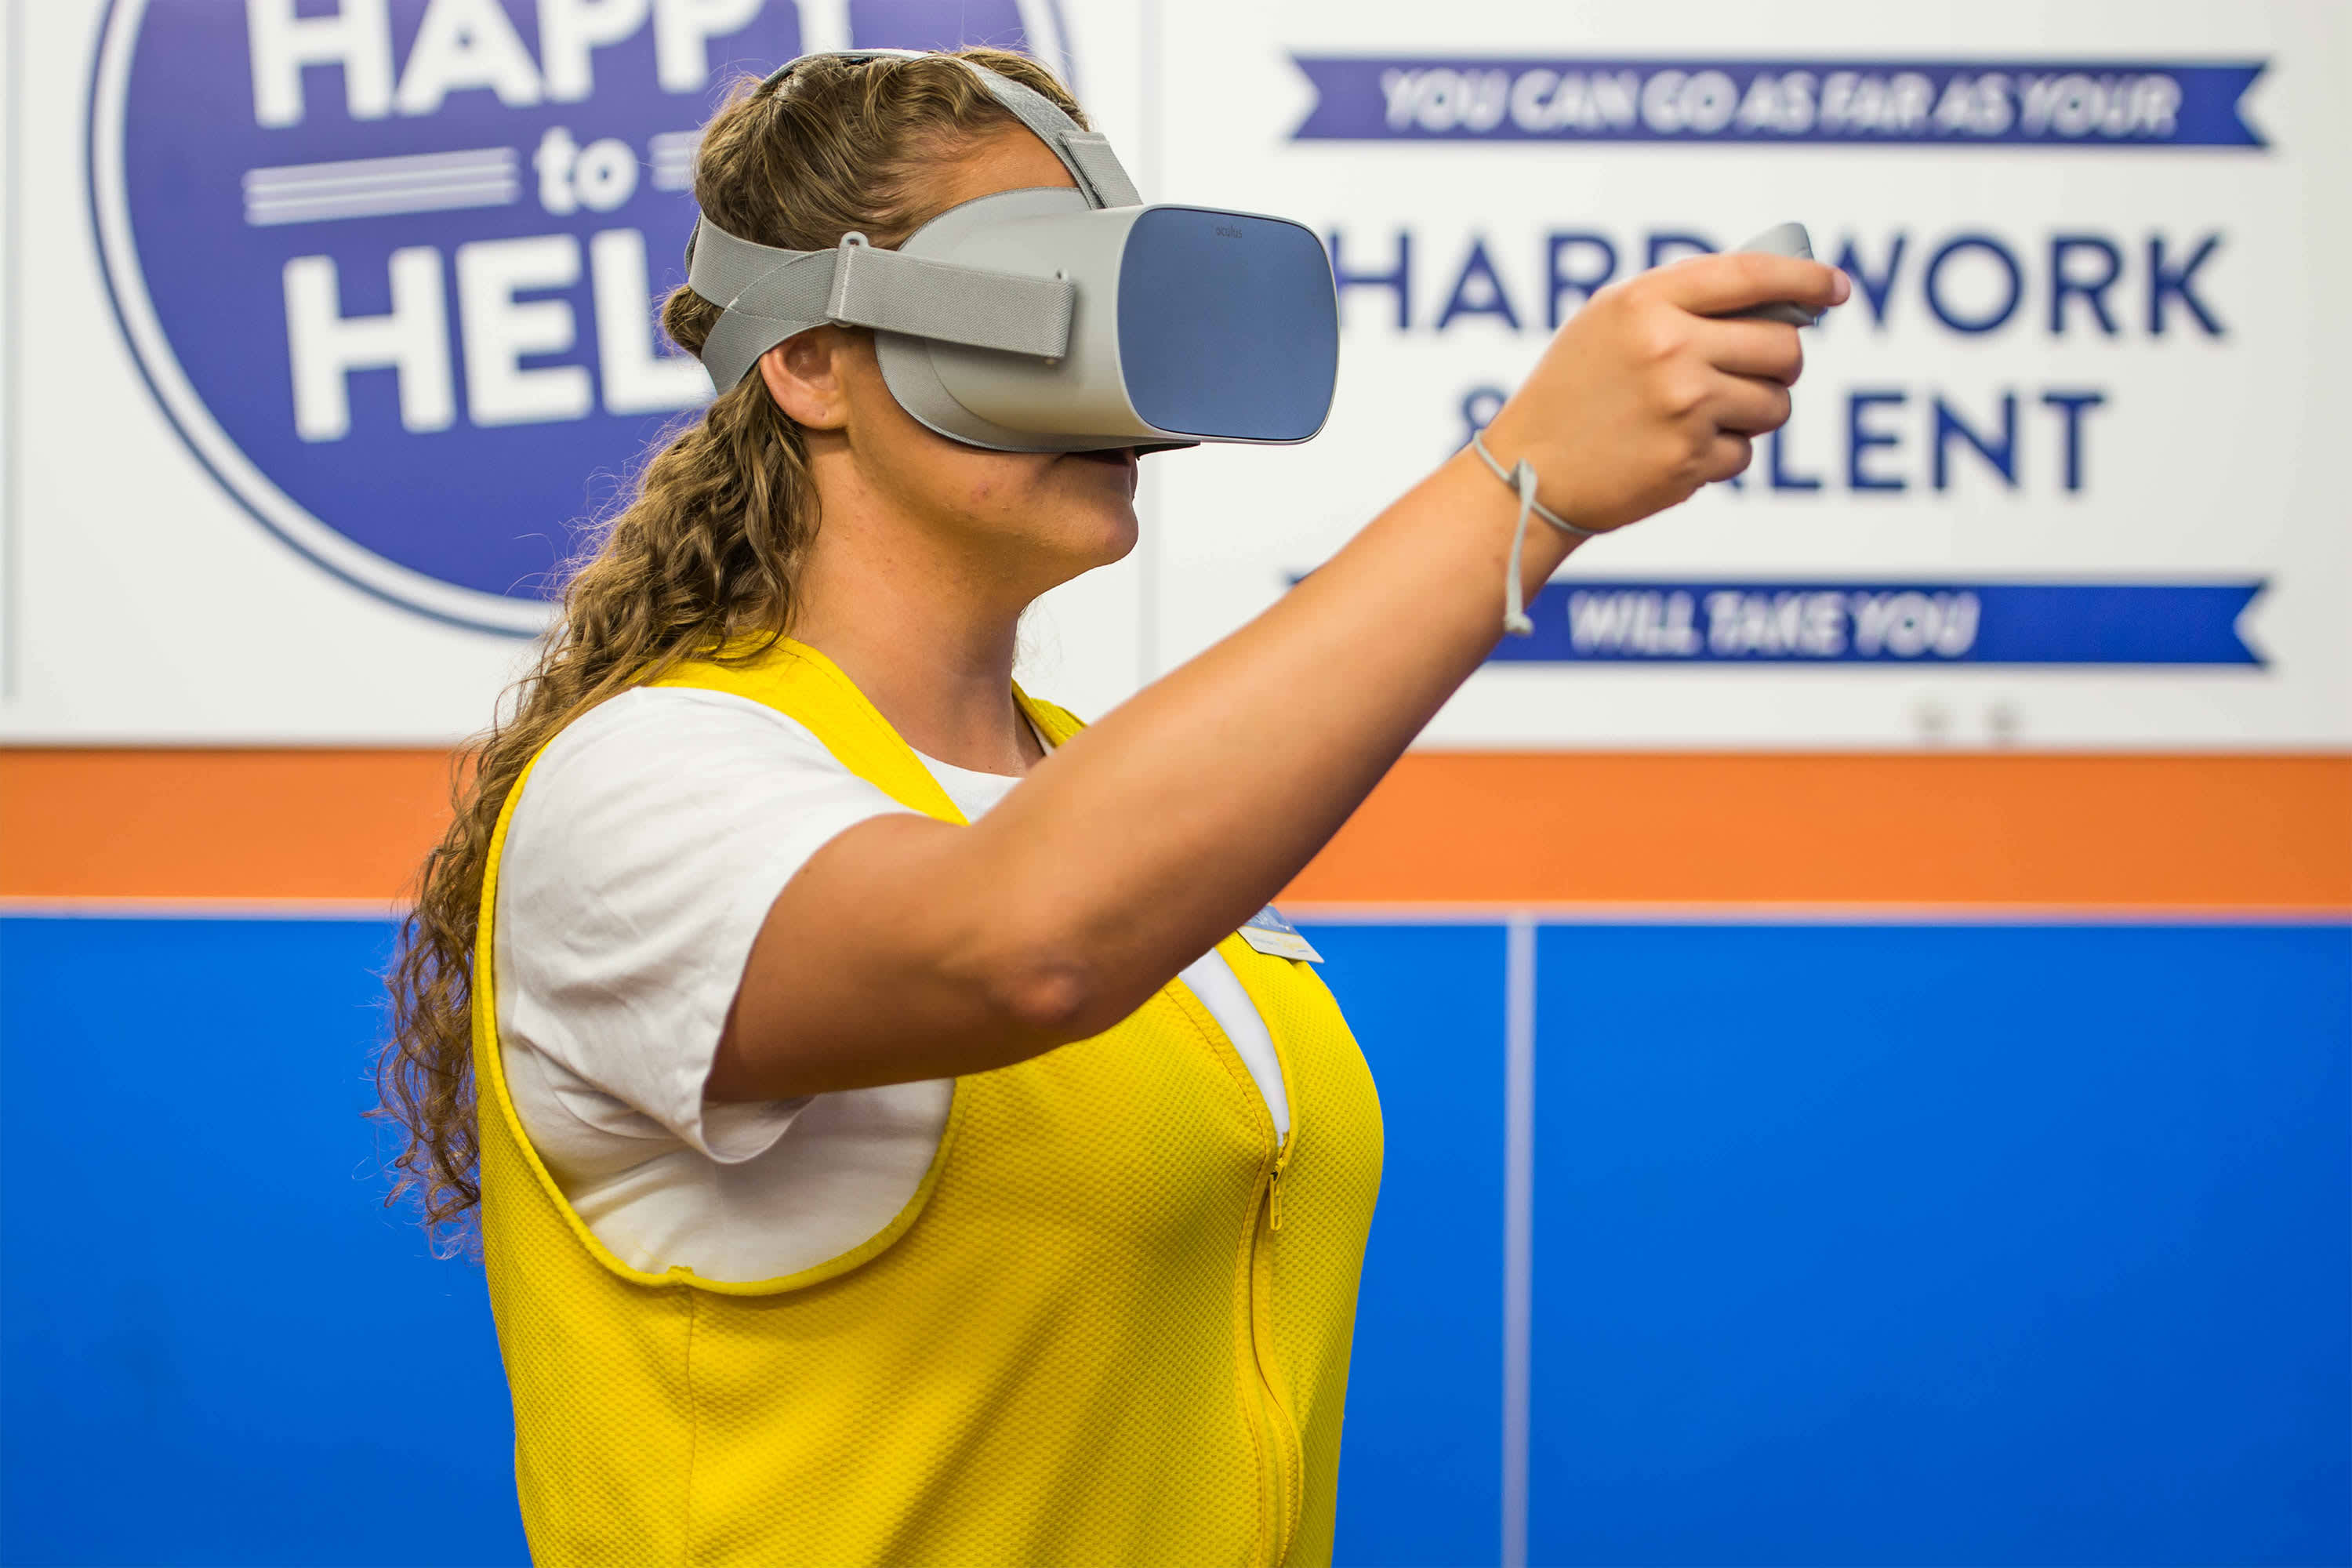 Why F500 companies use virtual reality to train workers of the future